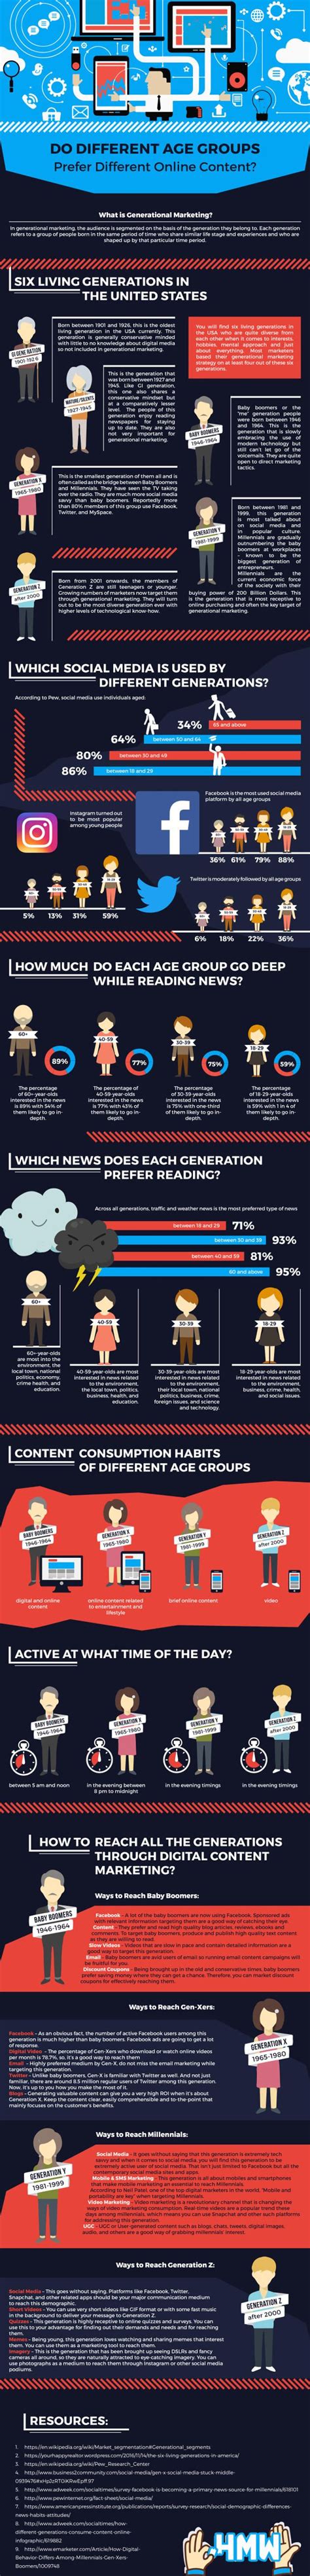 How Do Different Age Groups Consume Online Content Infographic